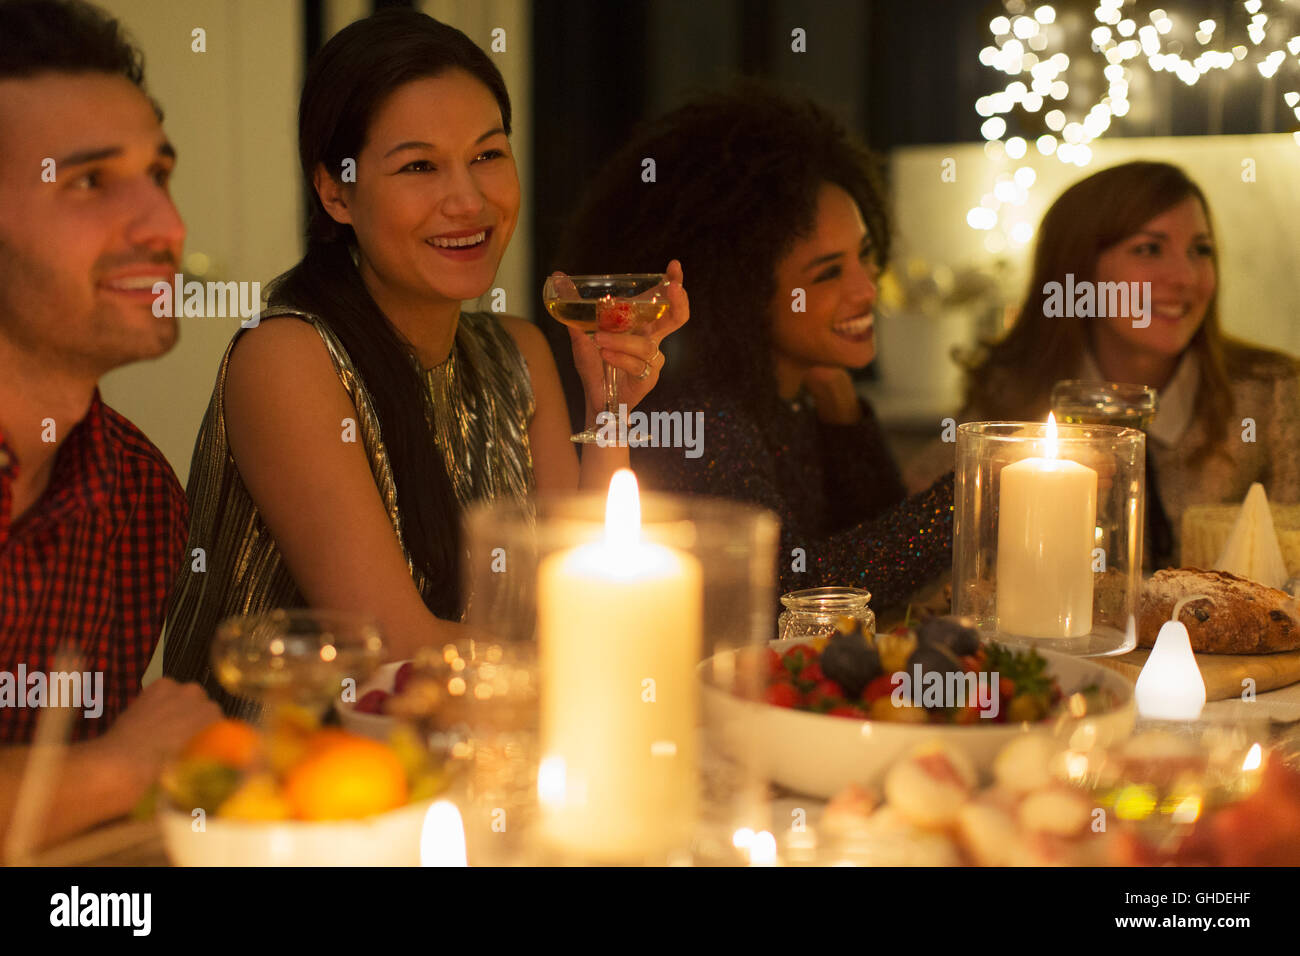 Smiling friends drinking champagne at candlelight Christmas dinner Stock Photo